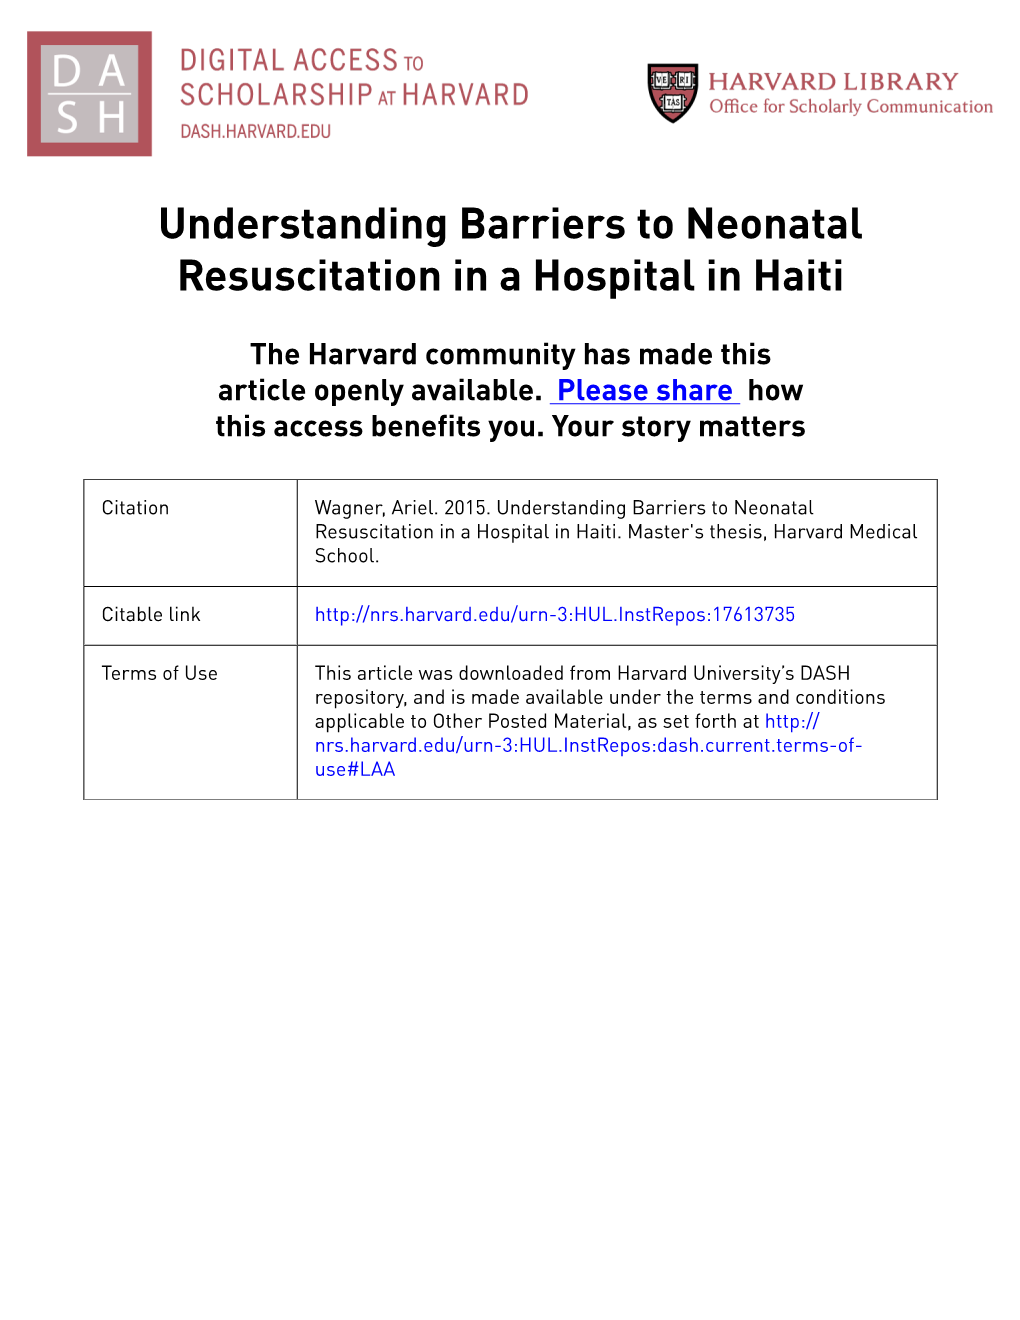 Understanding Barriers to Neonatal Resuscitation in a Hospital in Haiti